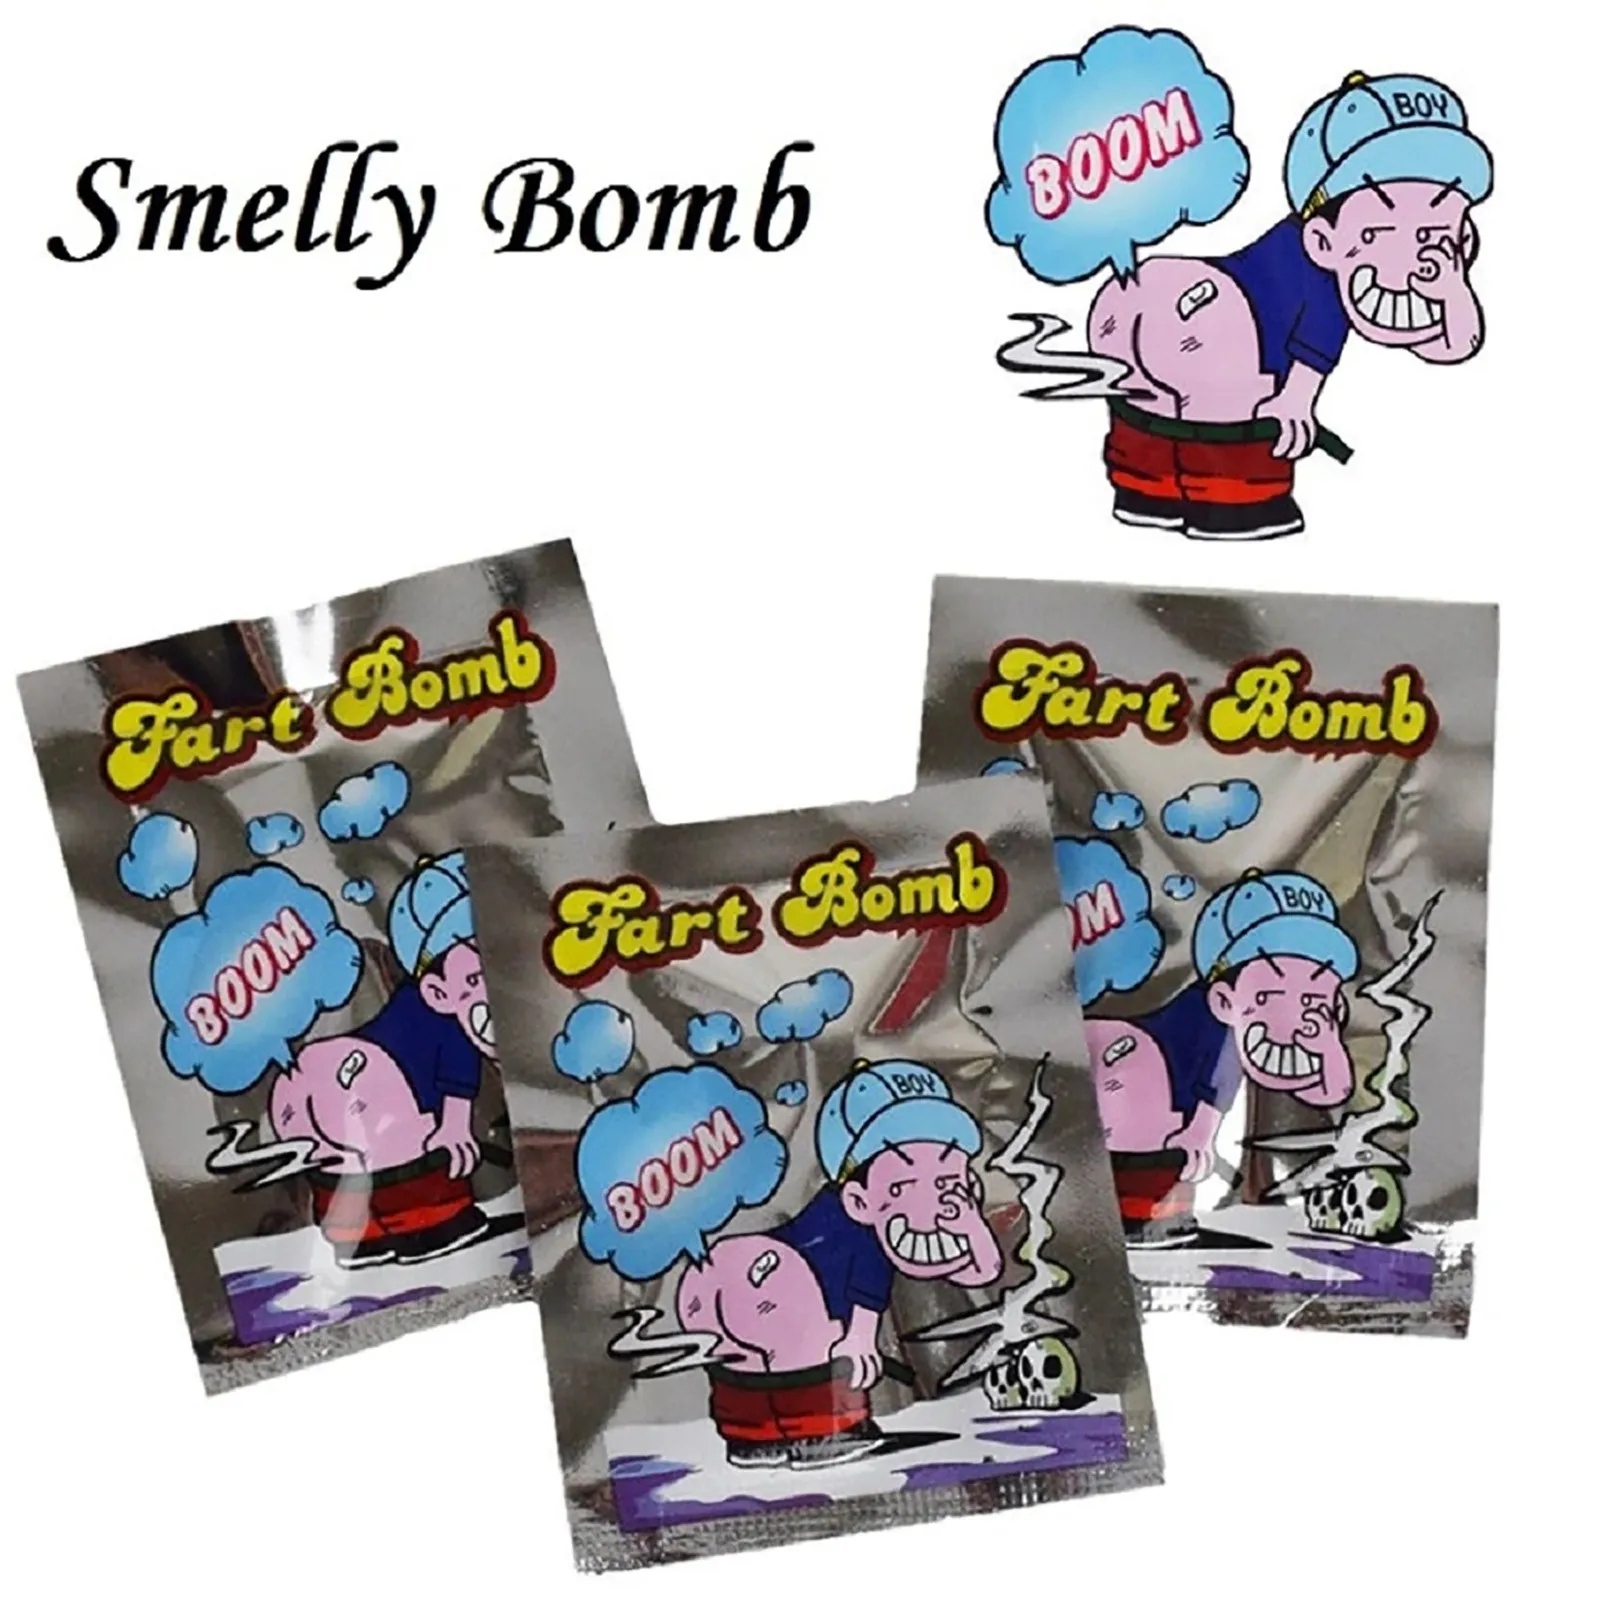 Deanyi 10 Pieces Smelly Fart Bomb Bag Fool Toy Novelty Prank Someone Stink Exploding Baby Game Funny toy 